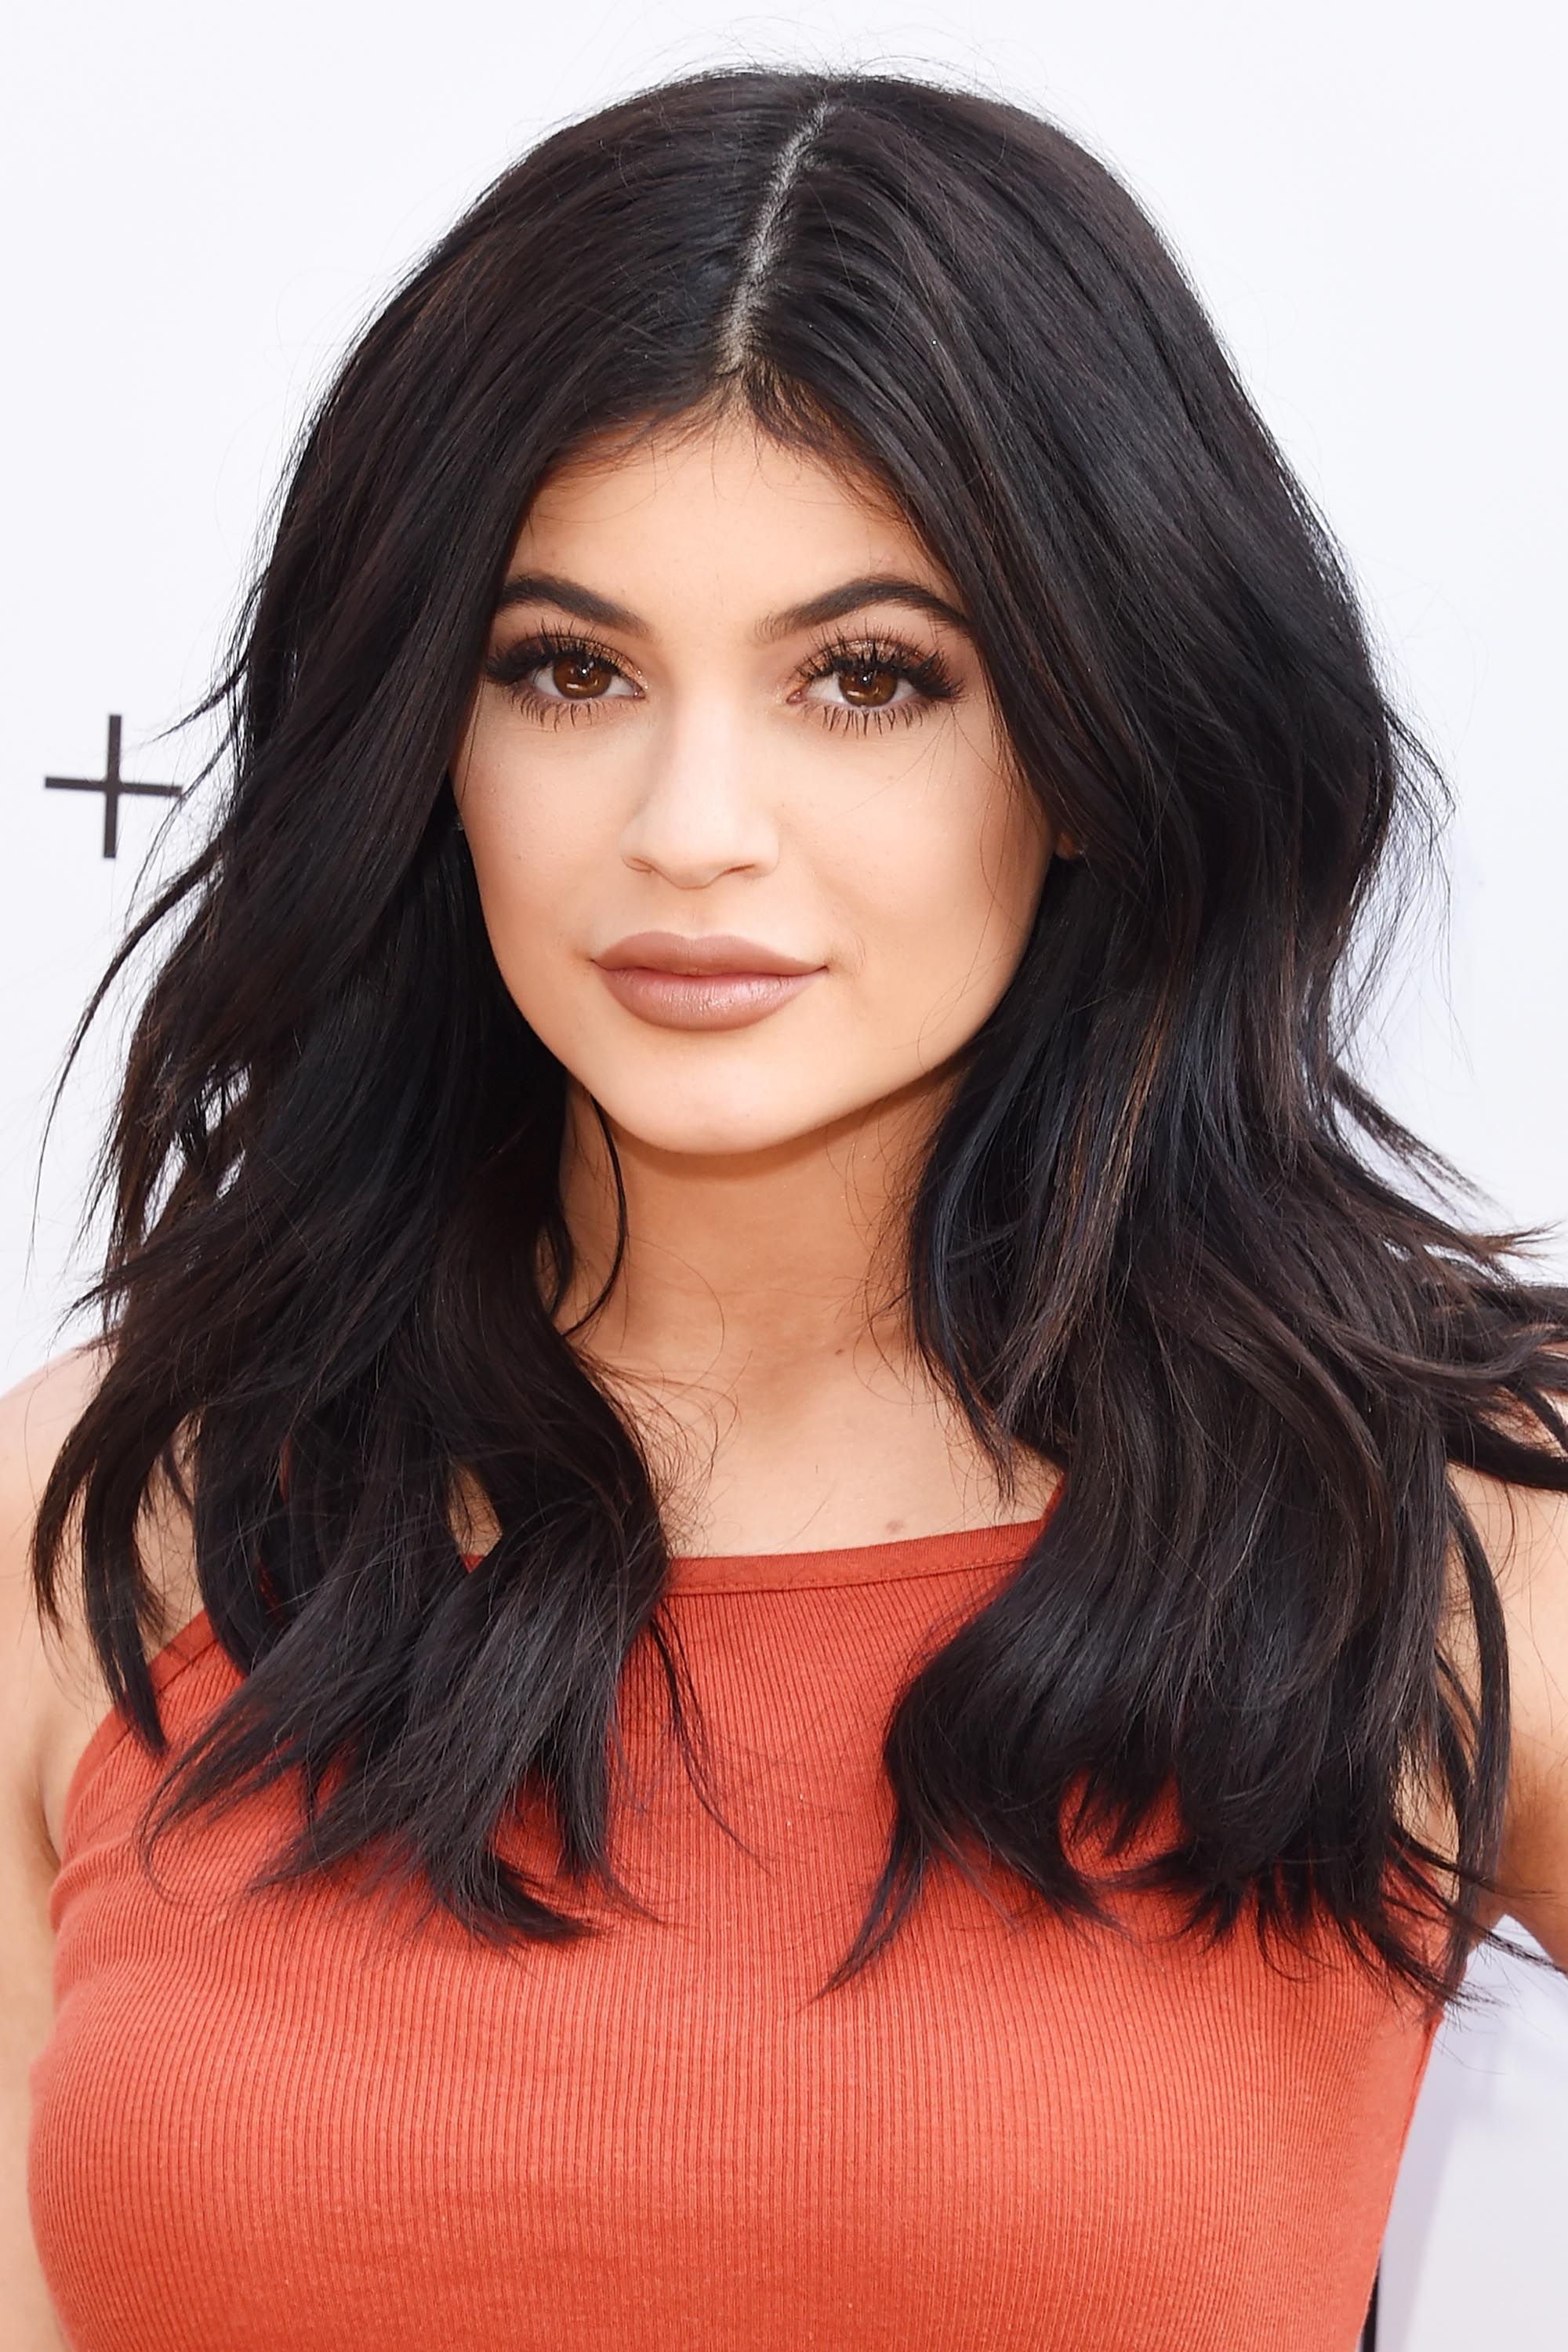 kylie jenner haircut styles pics